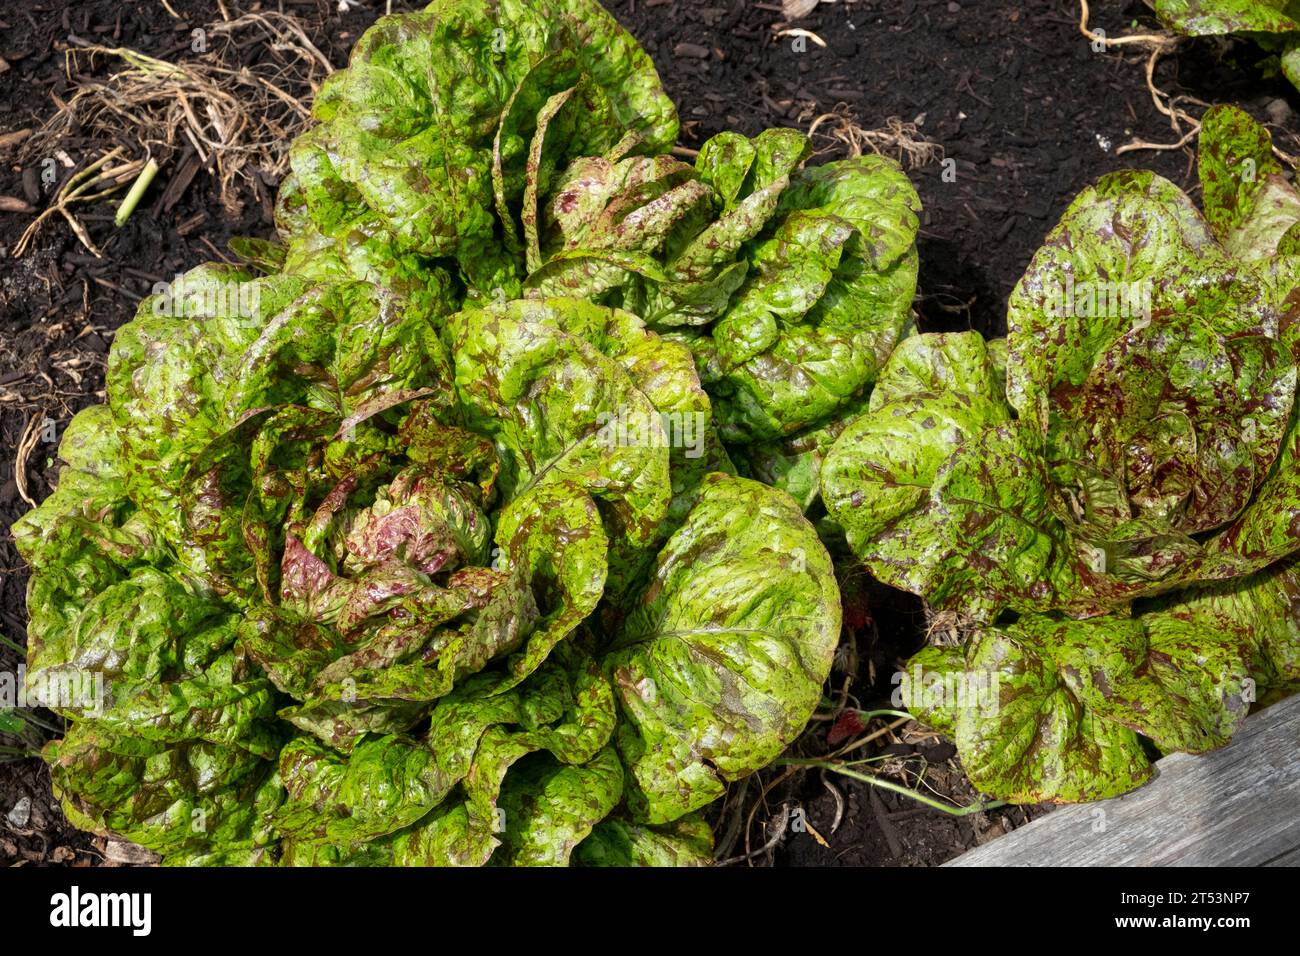 Speckled lettuce of the variety known as Flashy Troutback, a romaine lettuce with wine coloured speckles Stock Photo